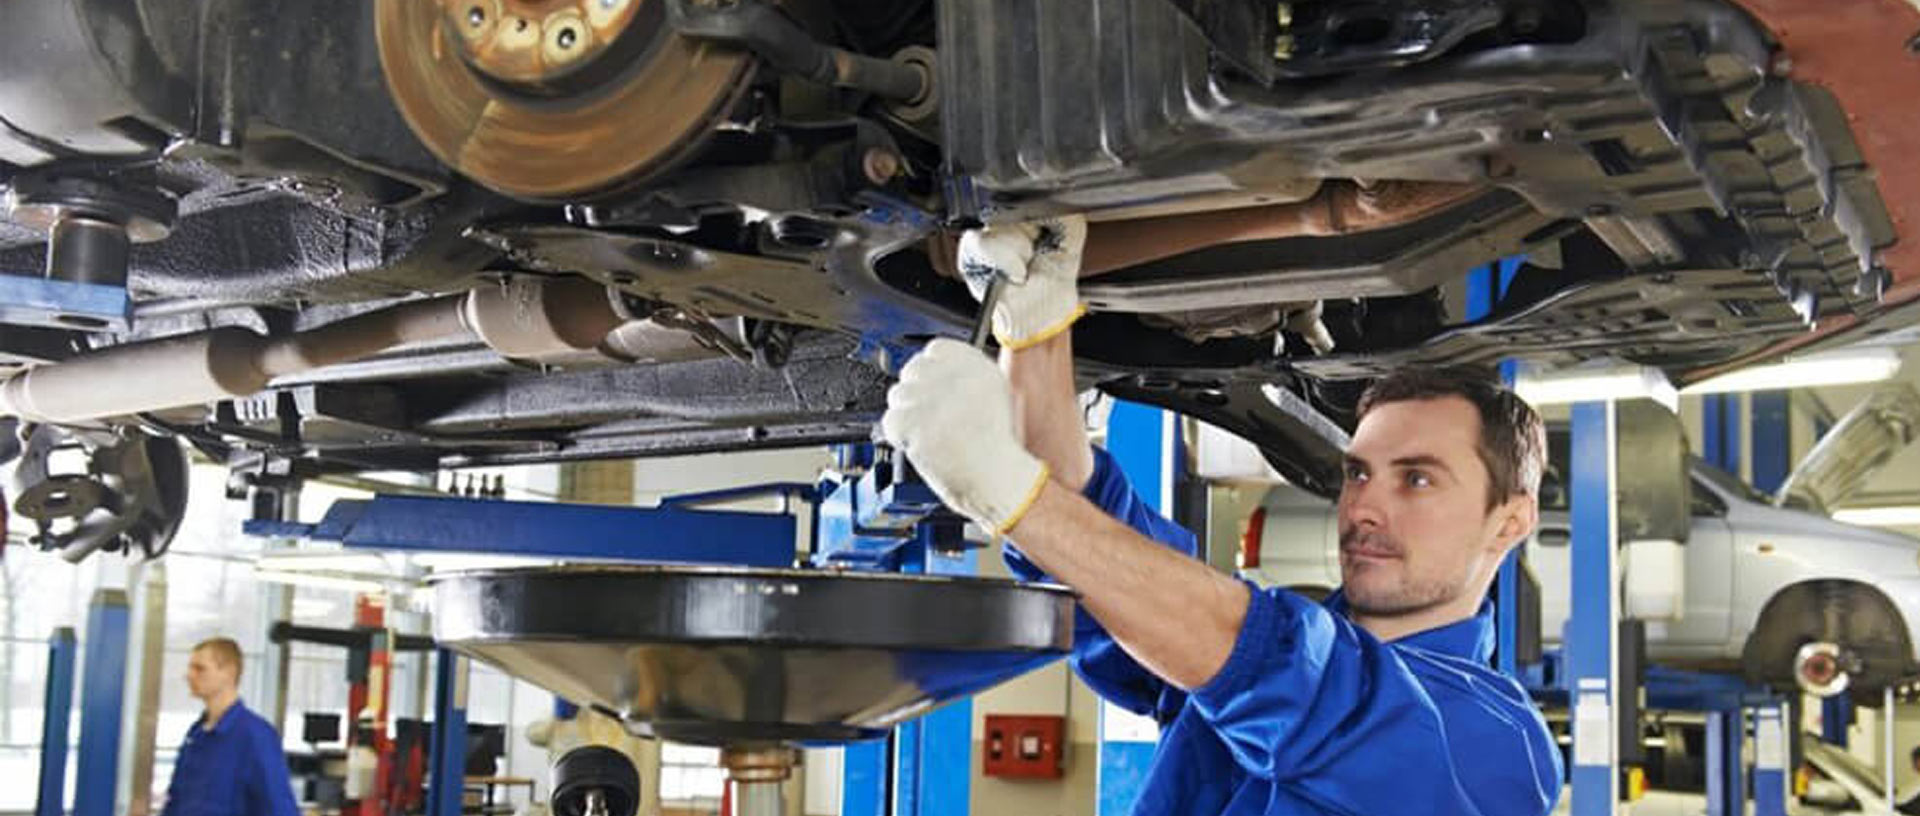 Vehicle Maintenance Services in Mascoutah, IL